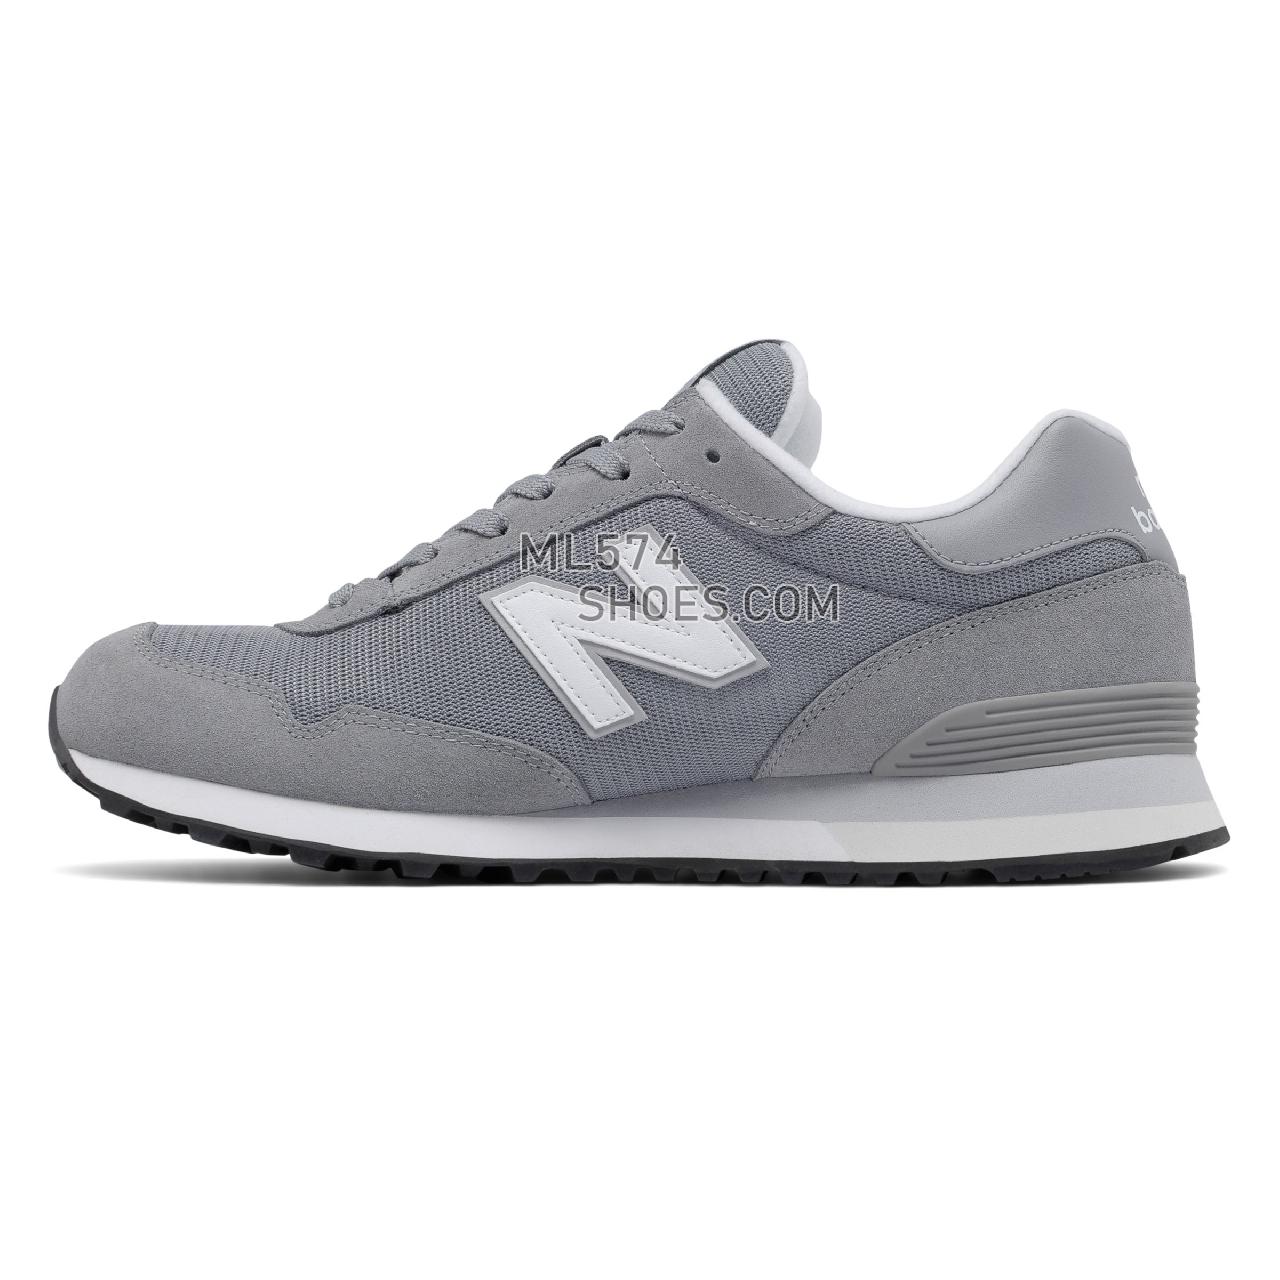 New Balance 515 Classic - Men's Sport Style Sneakers - Steel with White - ML515RSA